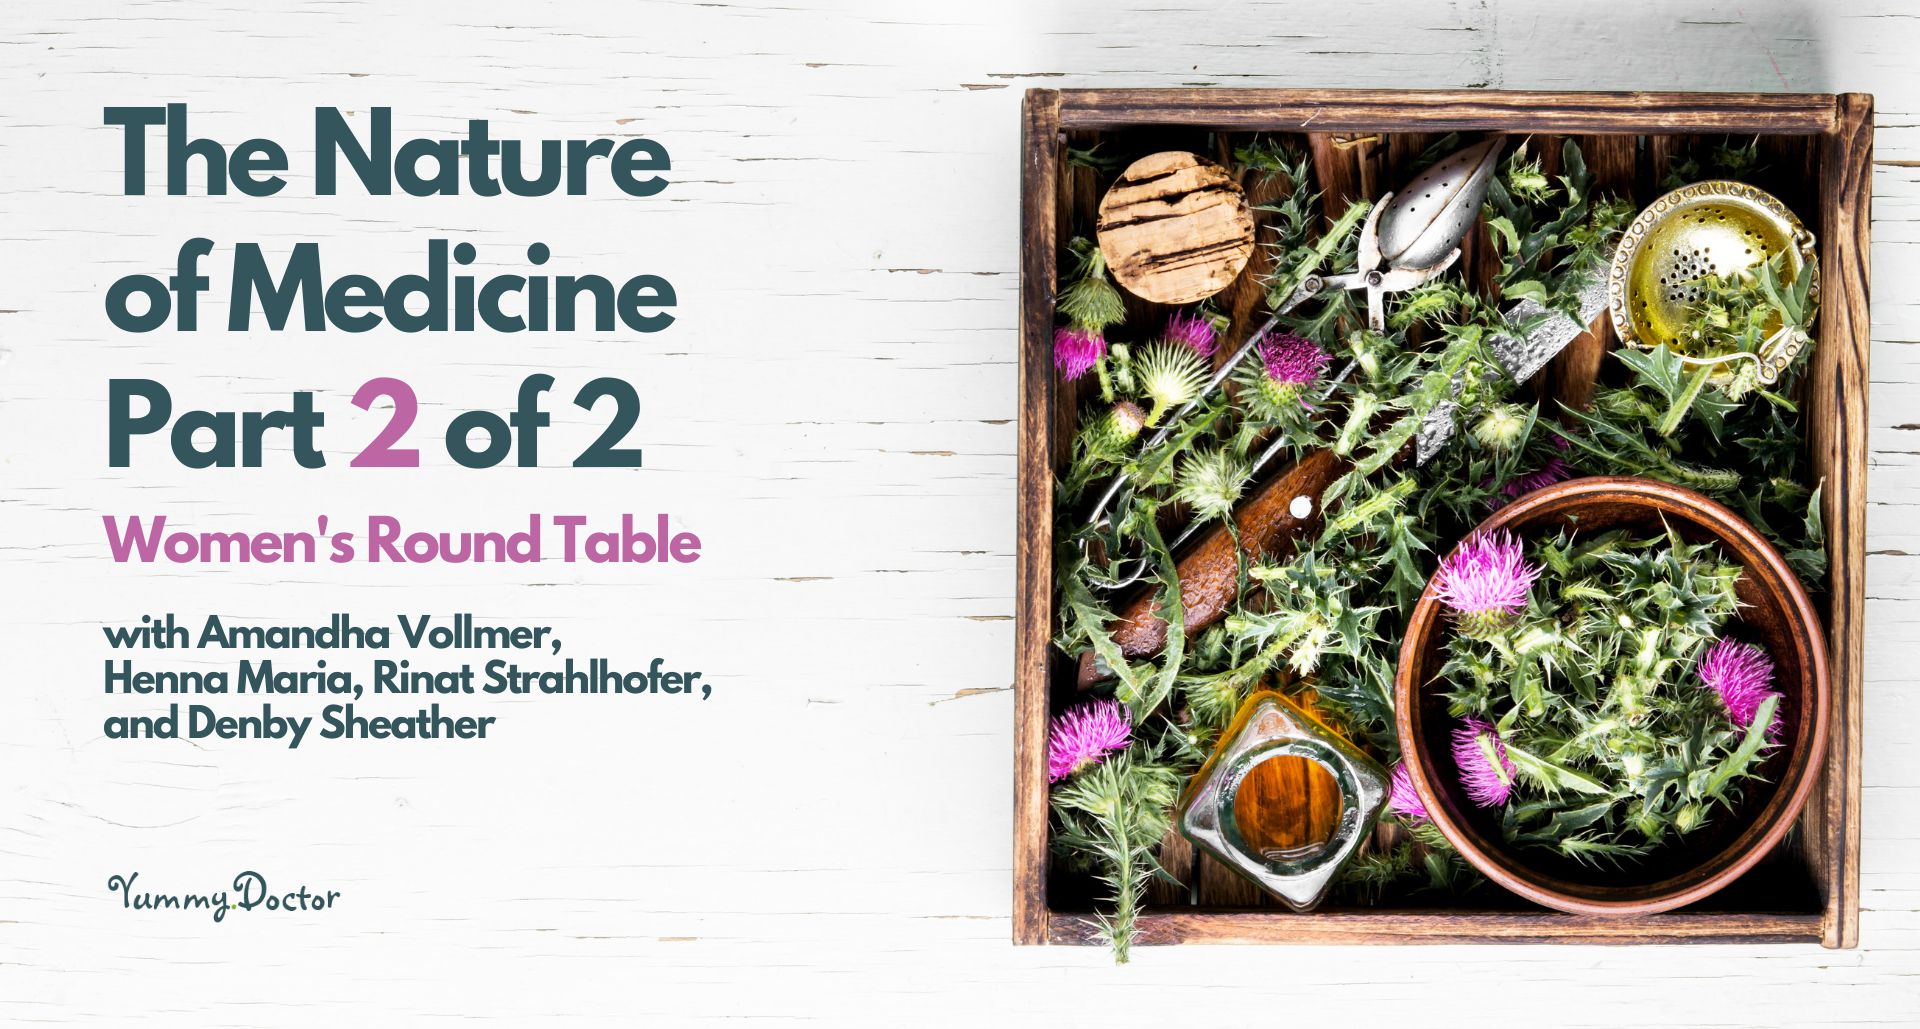 The Nature of Medicine Part Two of Two Womens Round Table - Part 2 of 2